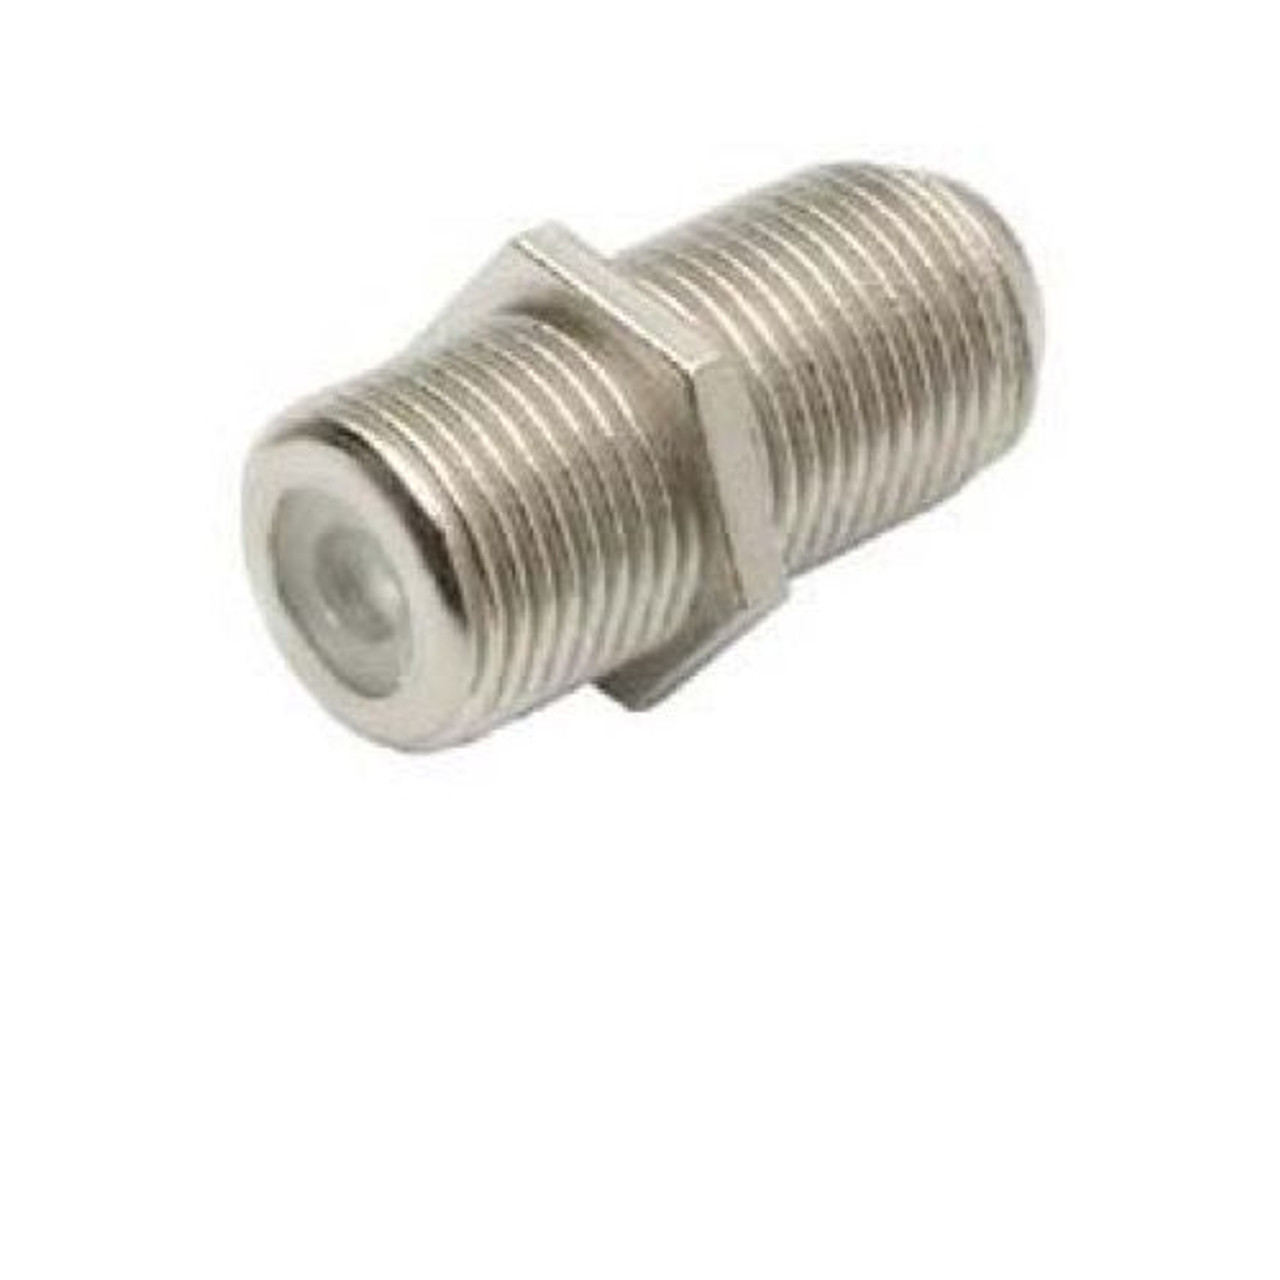 Eagle Aspen F81 Splice Barrel F-Coupler Female to Female Coupler 1 Pack Splicer Coax Adapter Connector Cable Barrel Jointer Coupling Audio Video Coaxial Cable Splice Plug Extension, Part # FF-10-B